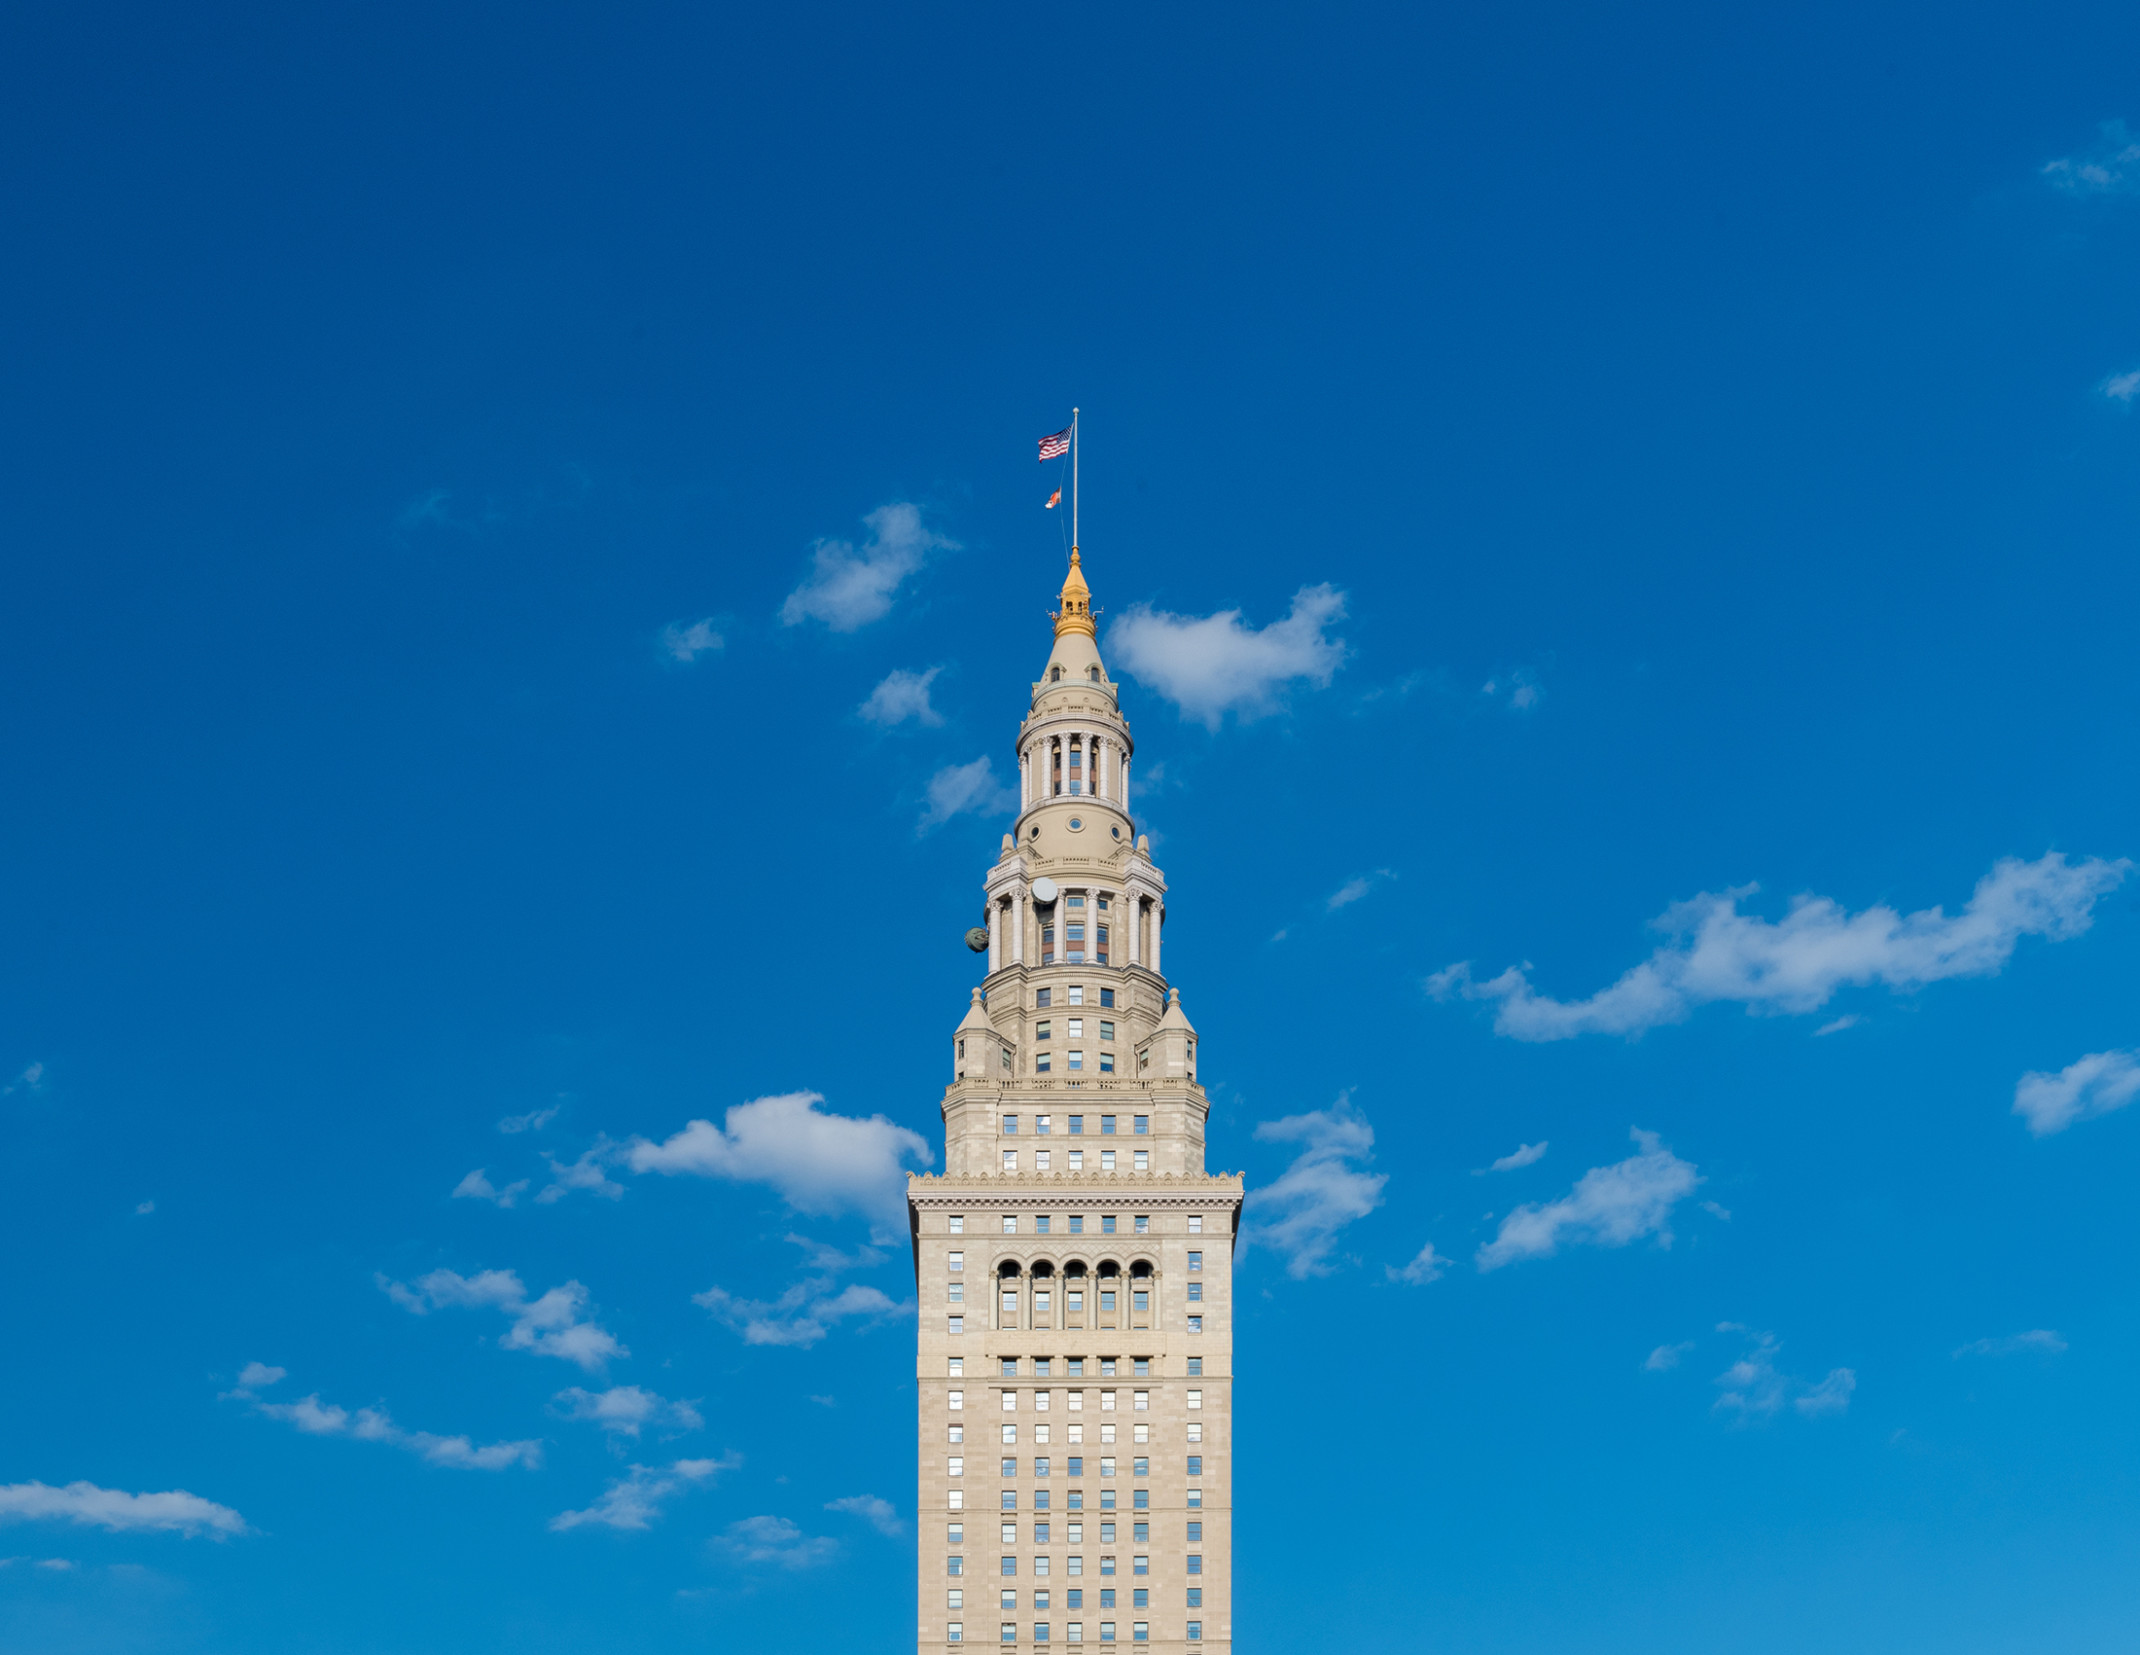 A gray skyscraper with arched windows, columned rotunda, gold cupola, and spire flying a flag on top against a clear blue sky